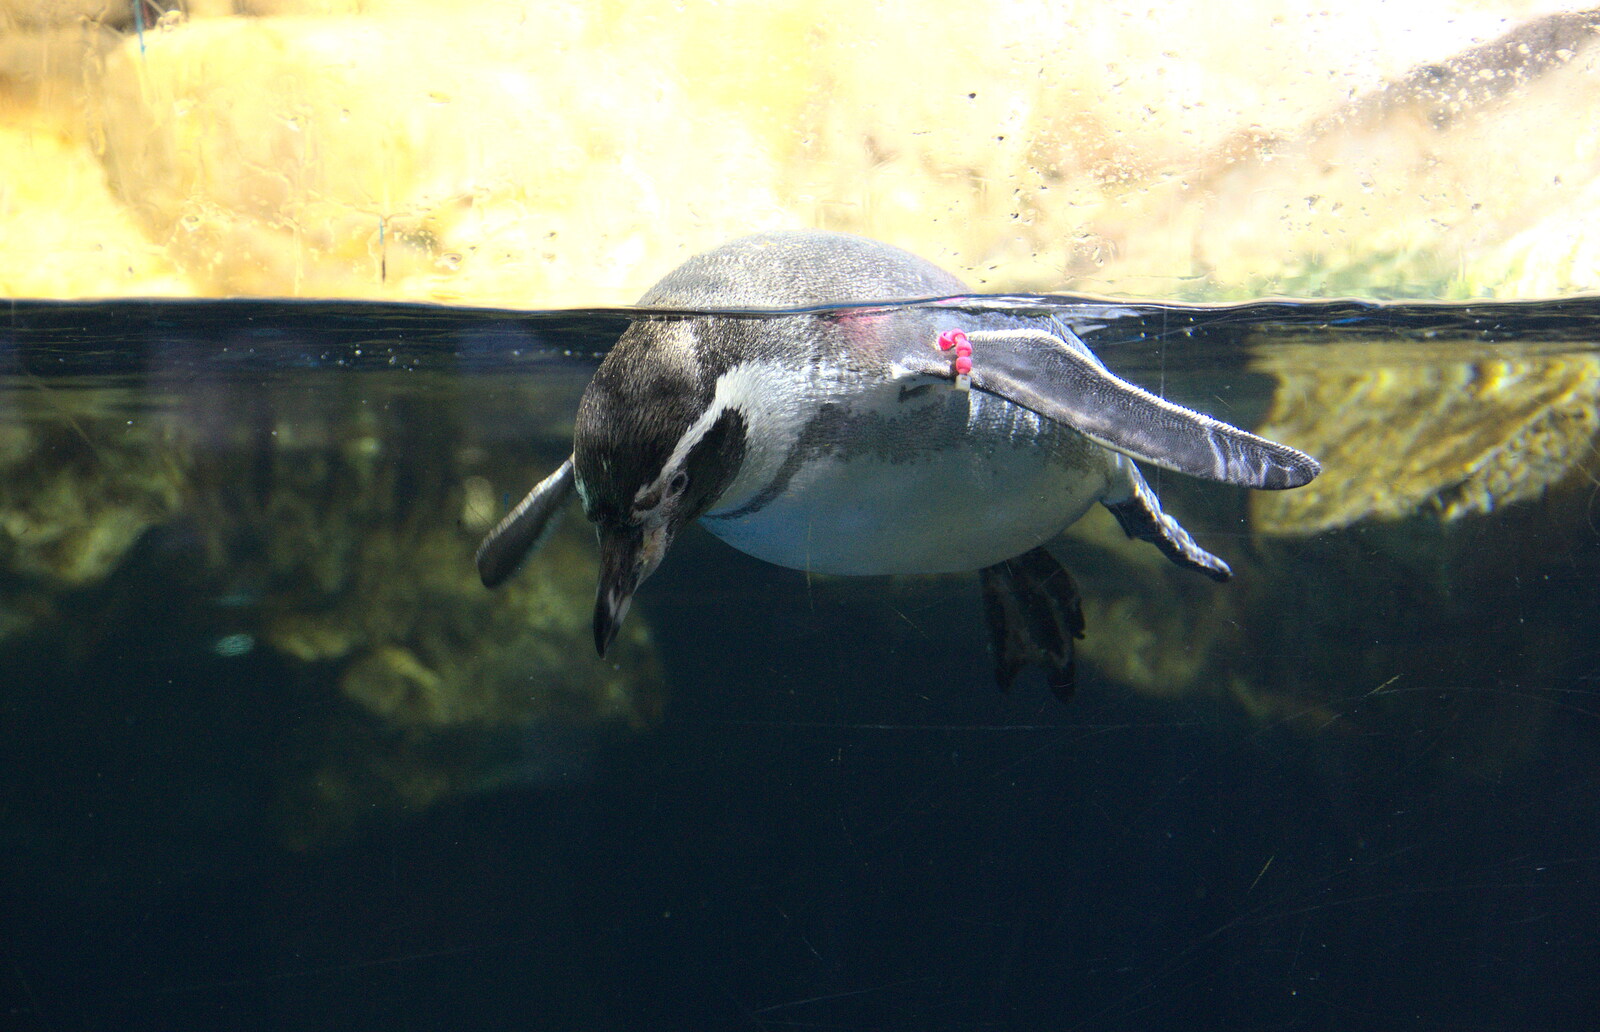 A penguin swims about from L'Aquarium de Barcelona, Port Vell, Catalonia, Spain - 23rd October 2017